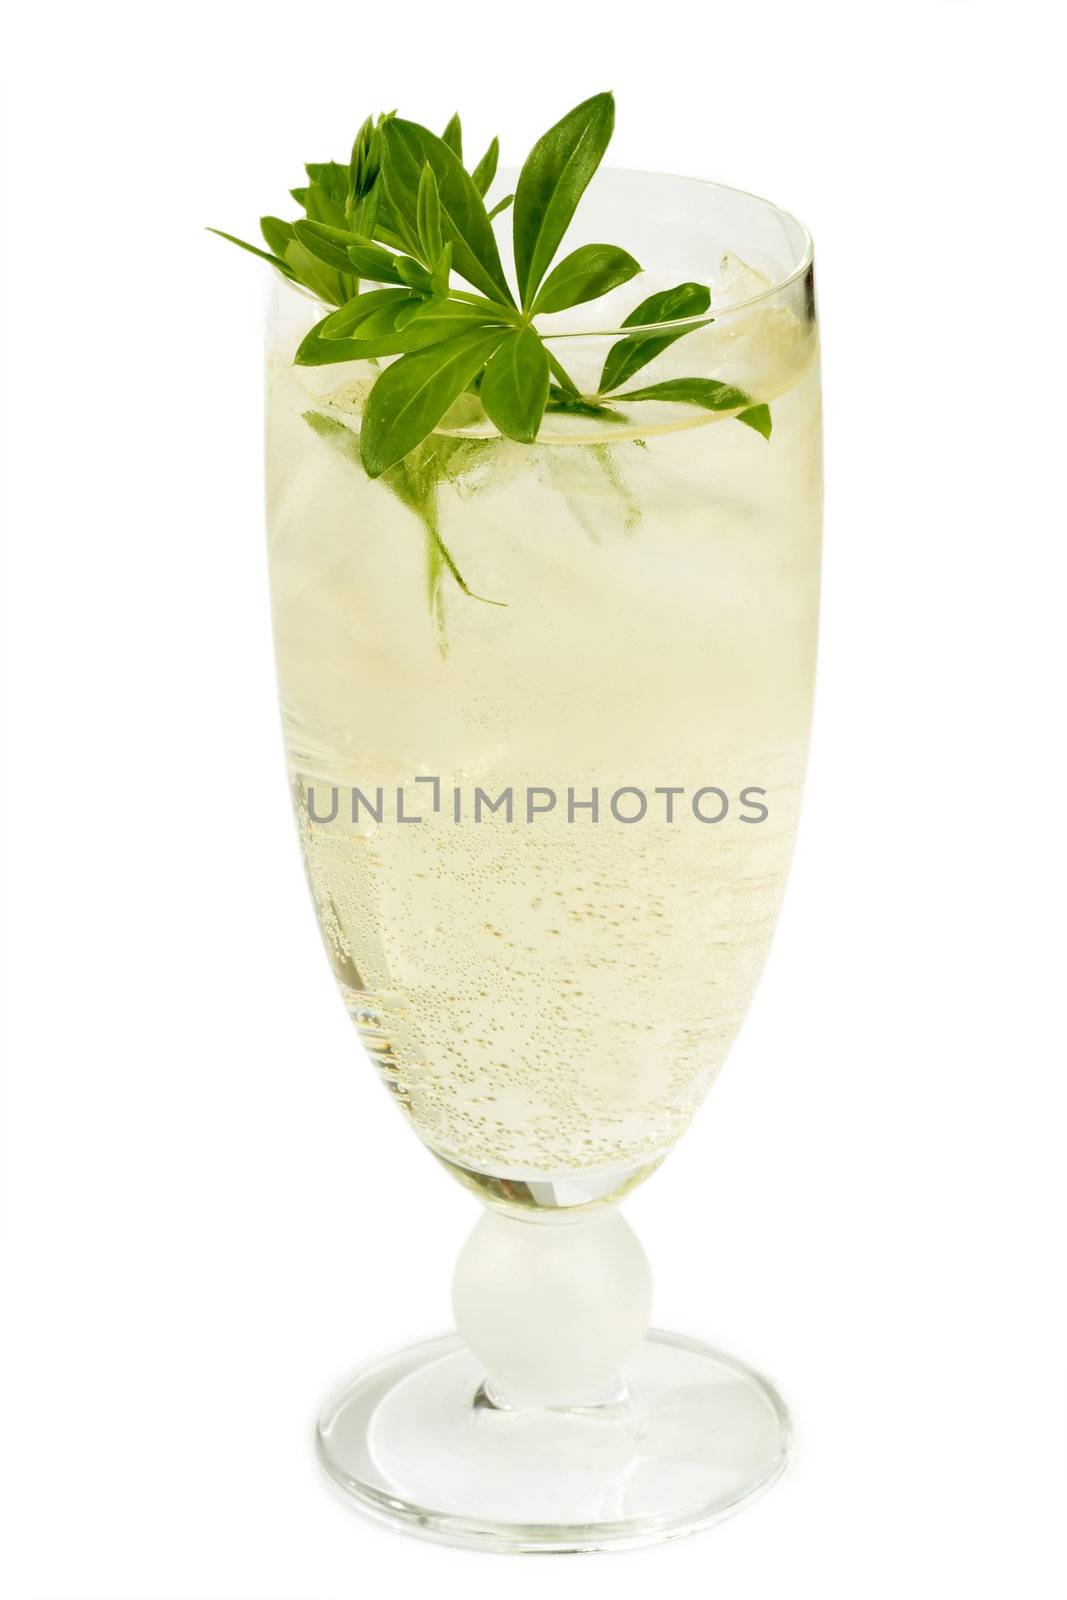 Punch with sweet woodruff herbs on bright background